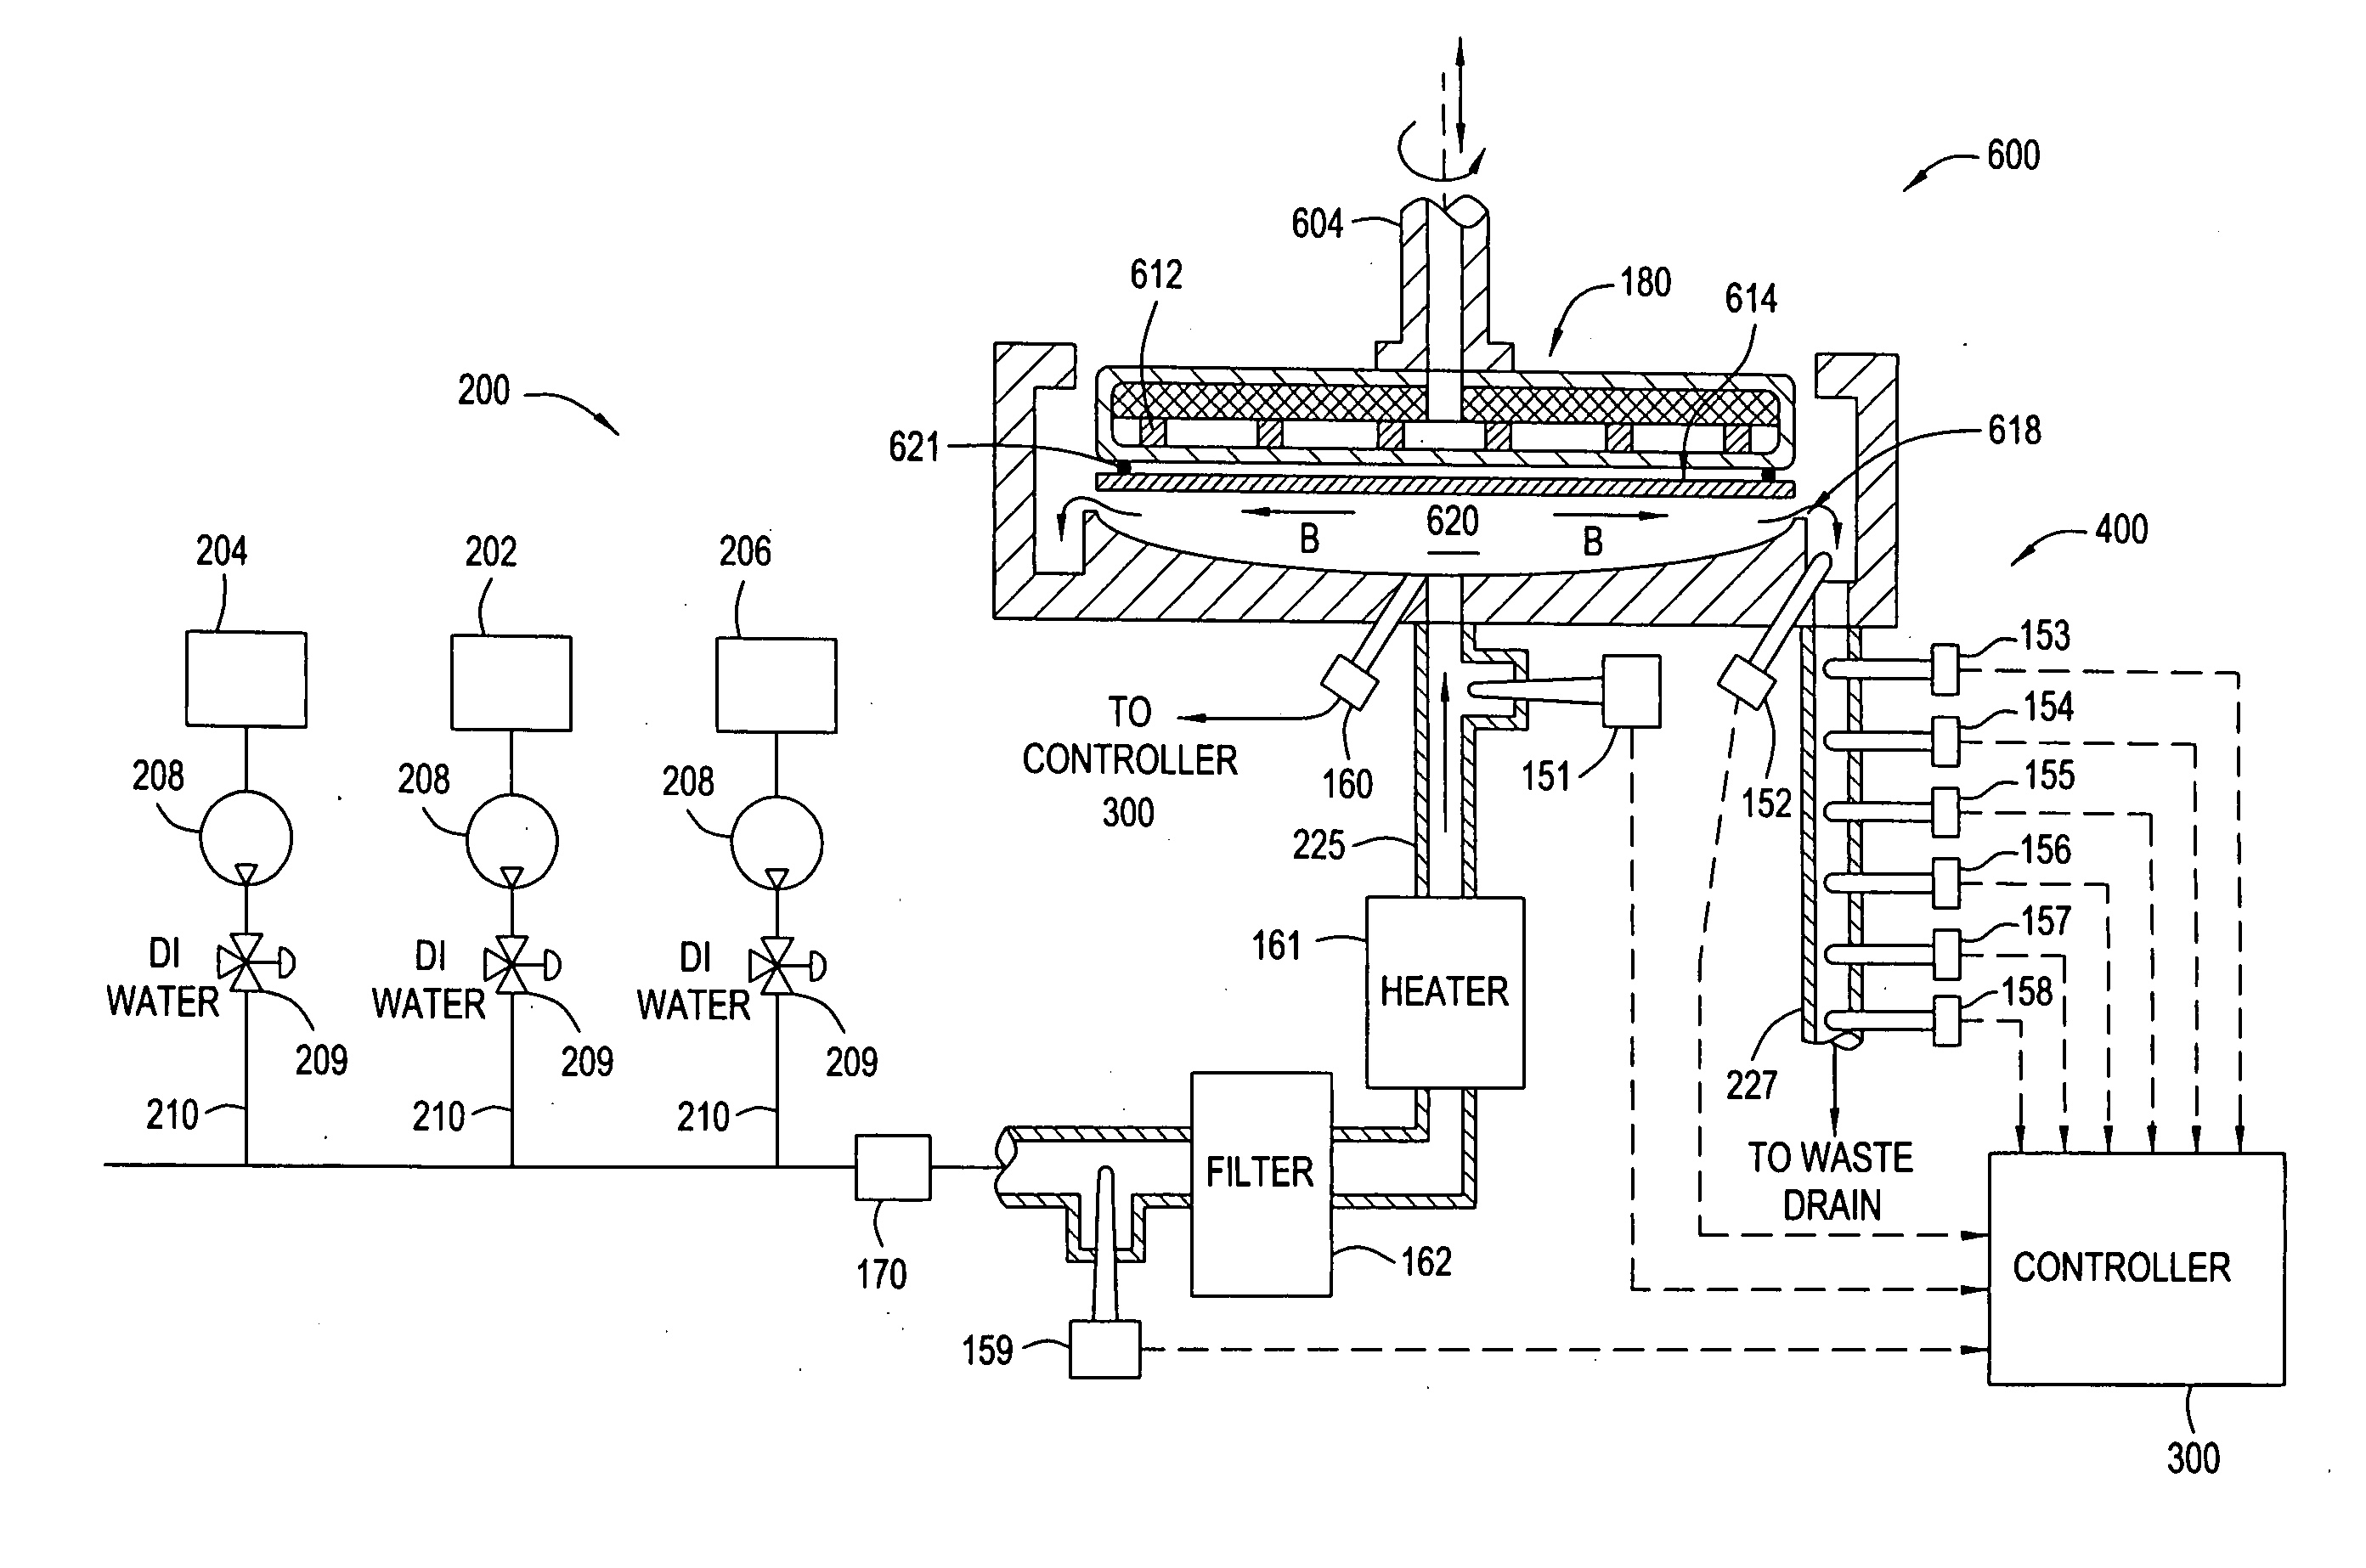 Measurement techniques for controlling aspects of a electroless deposition process